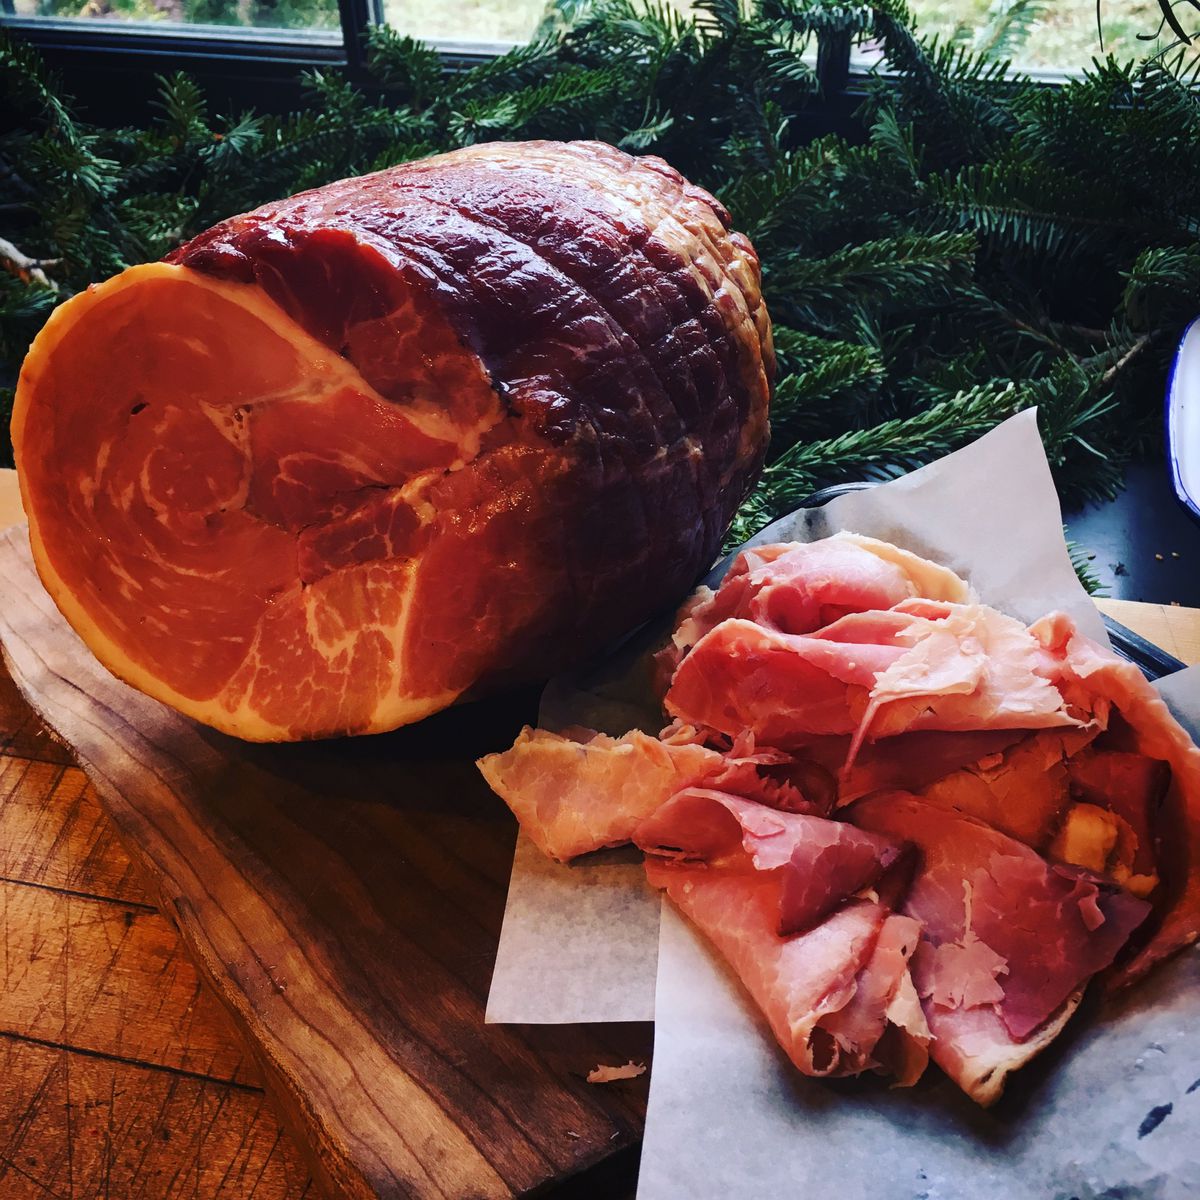 A smoked ham sliced, surrounded by green fur branches